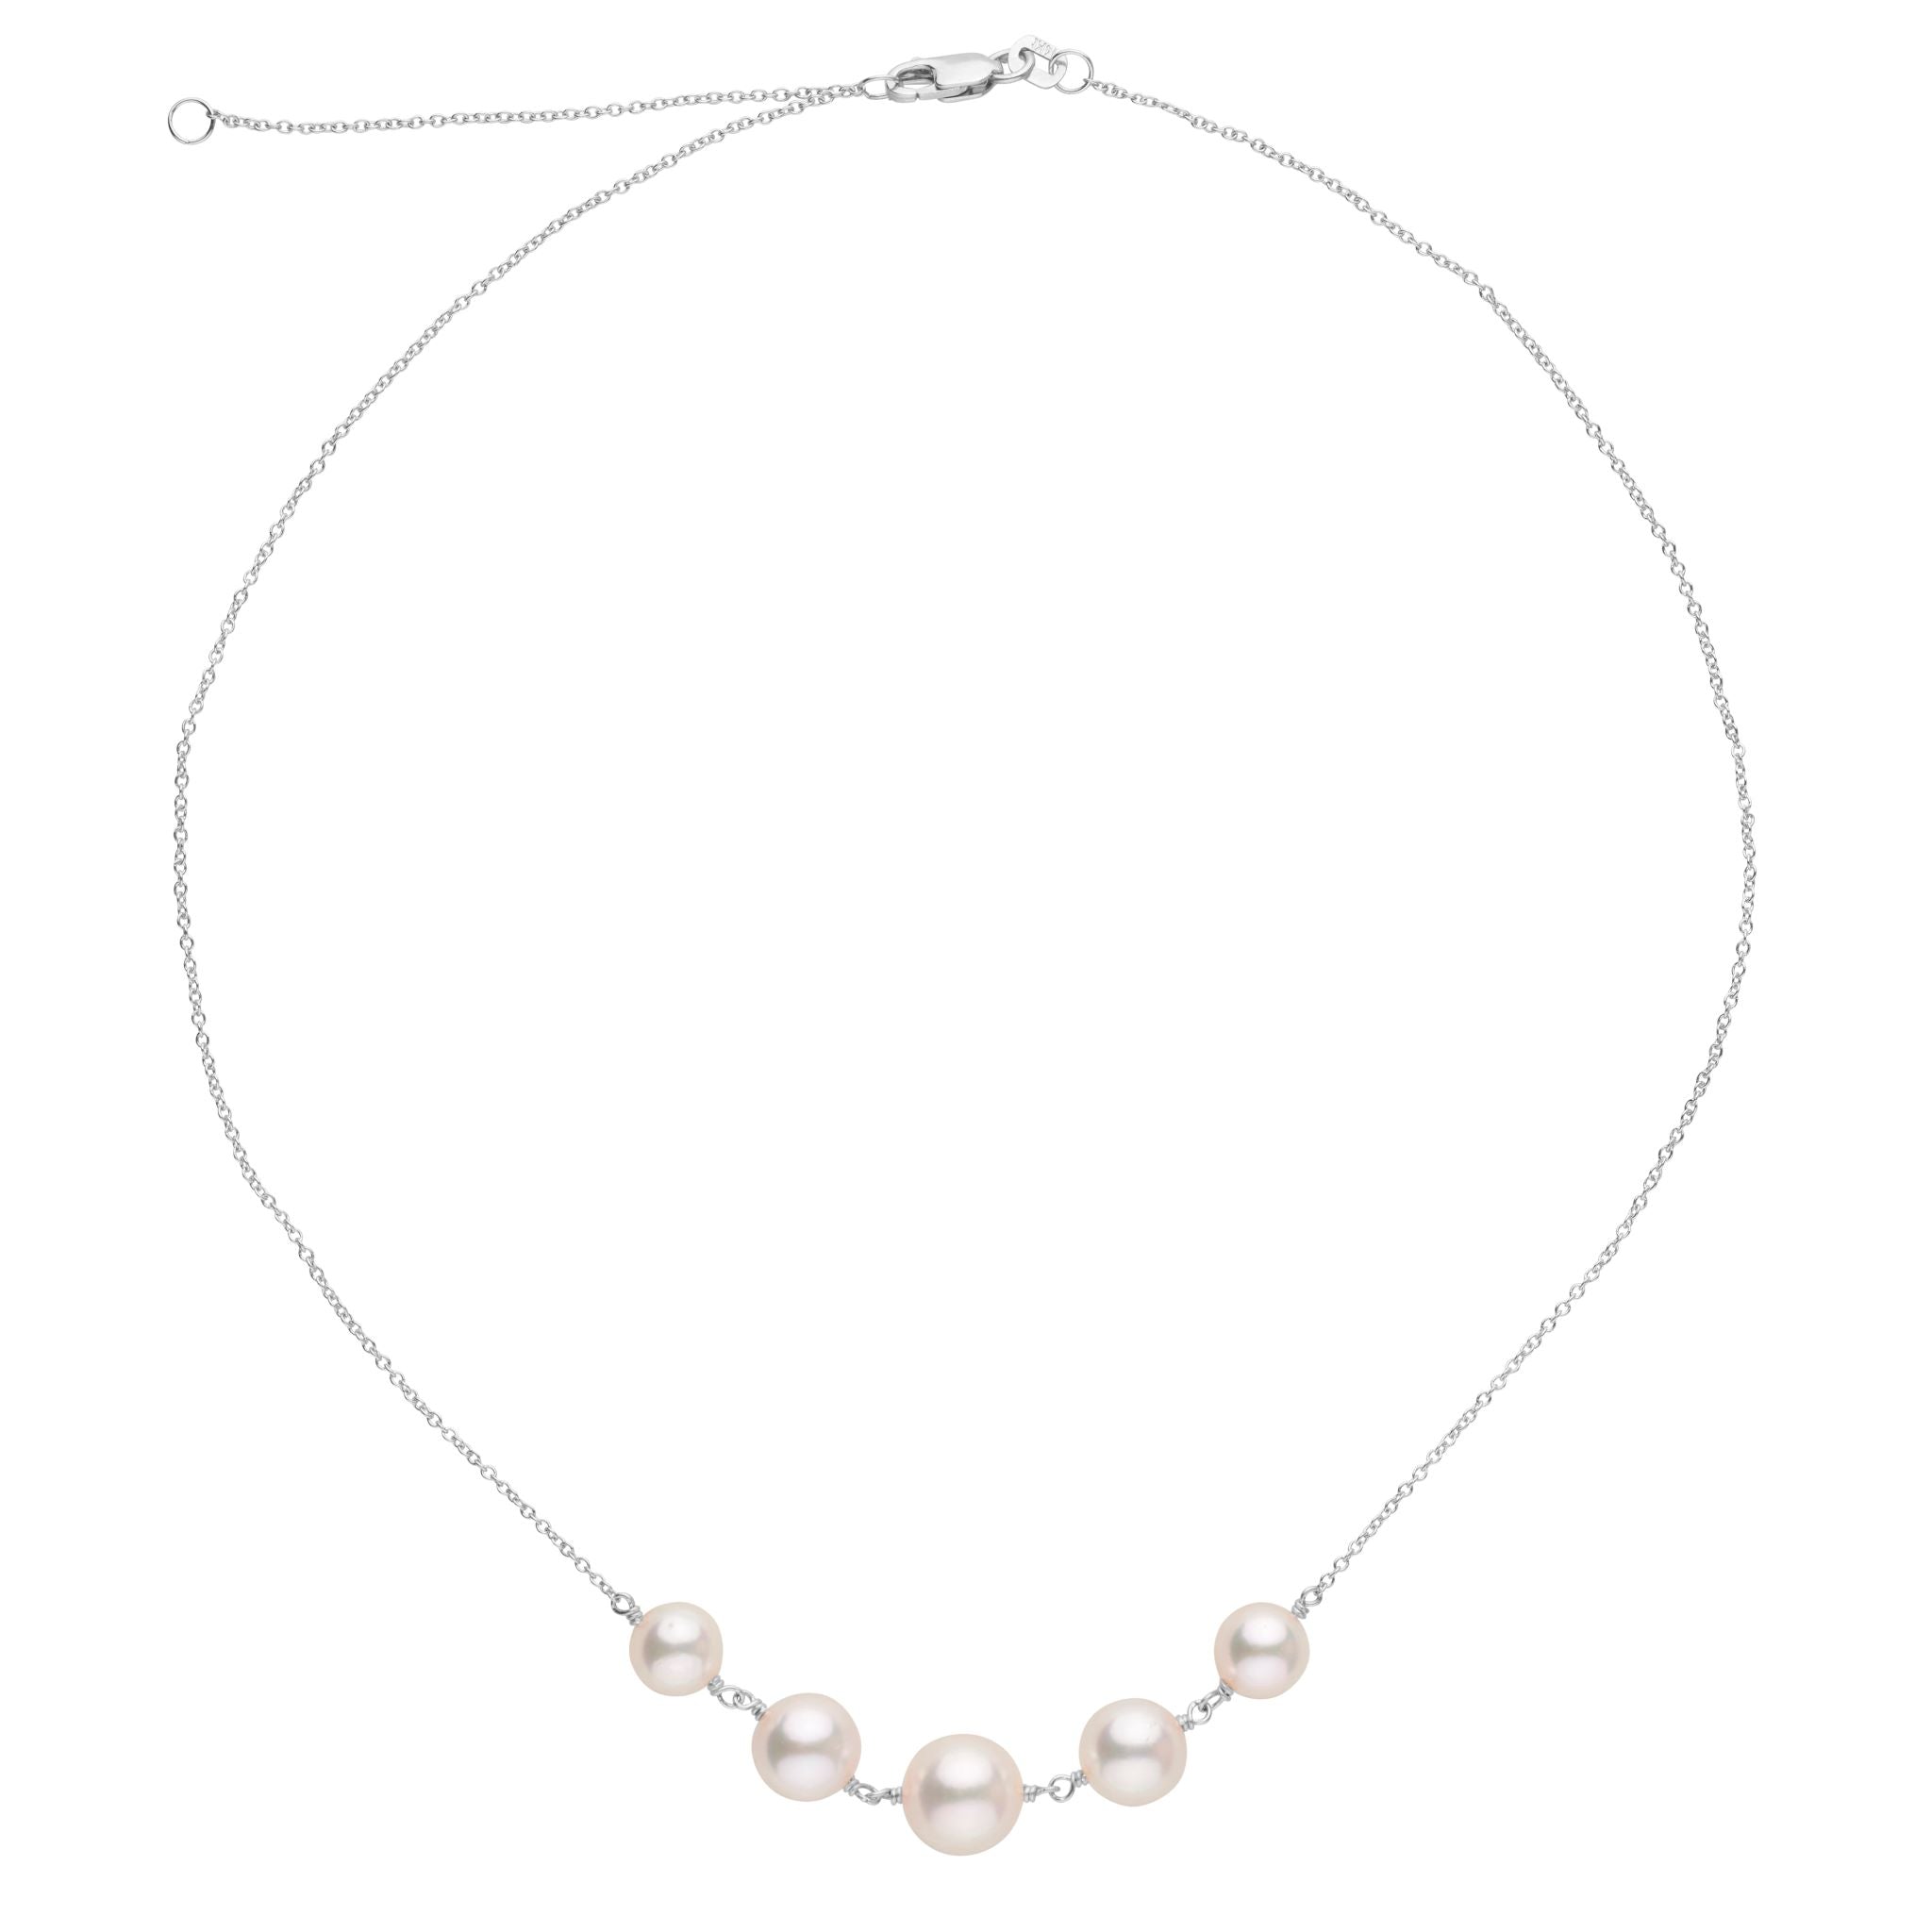 Quintet Collection 6.5-9.0 mm Akoya Pearl Necklace white gold